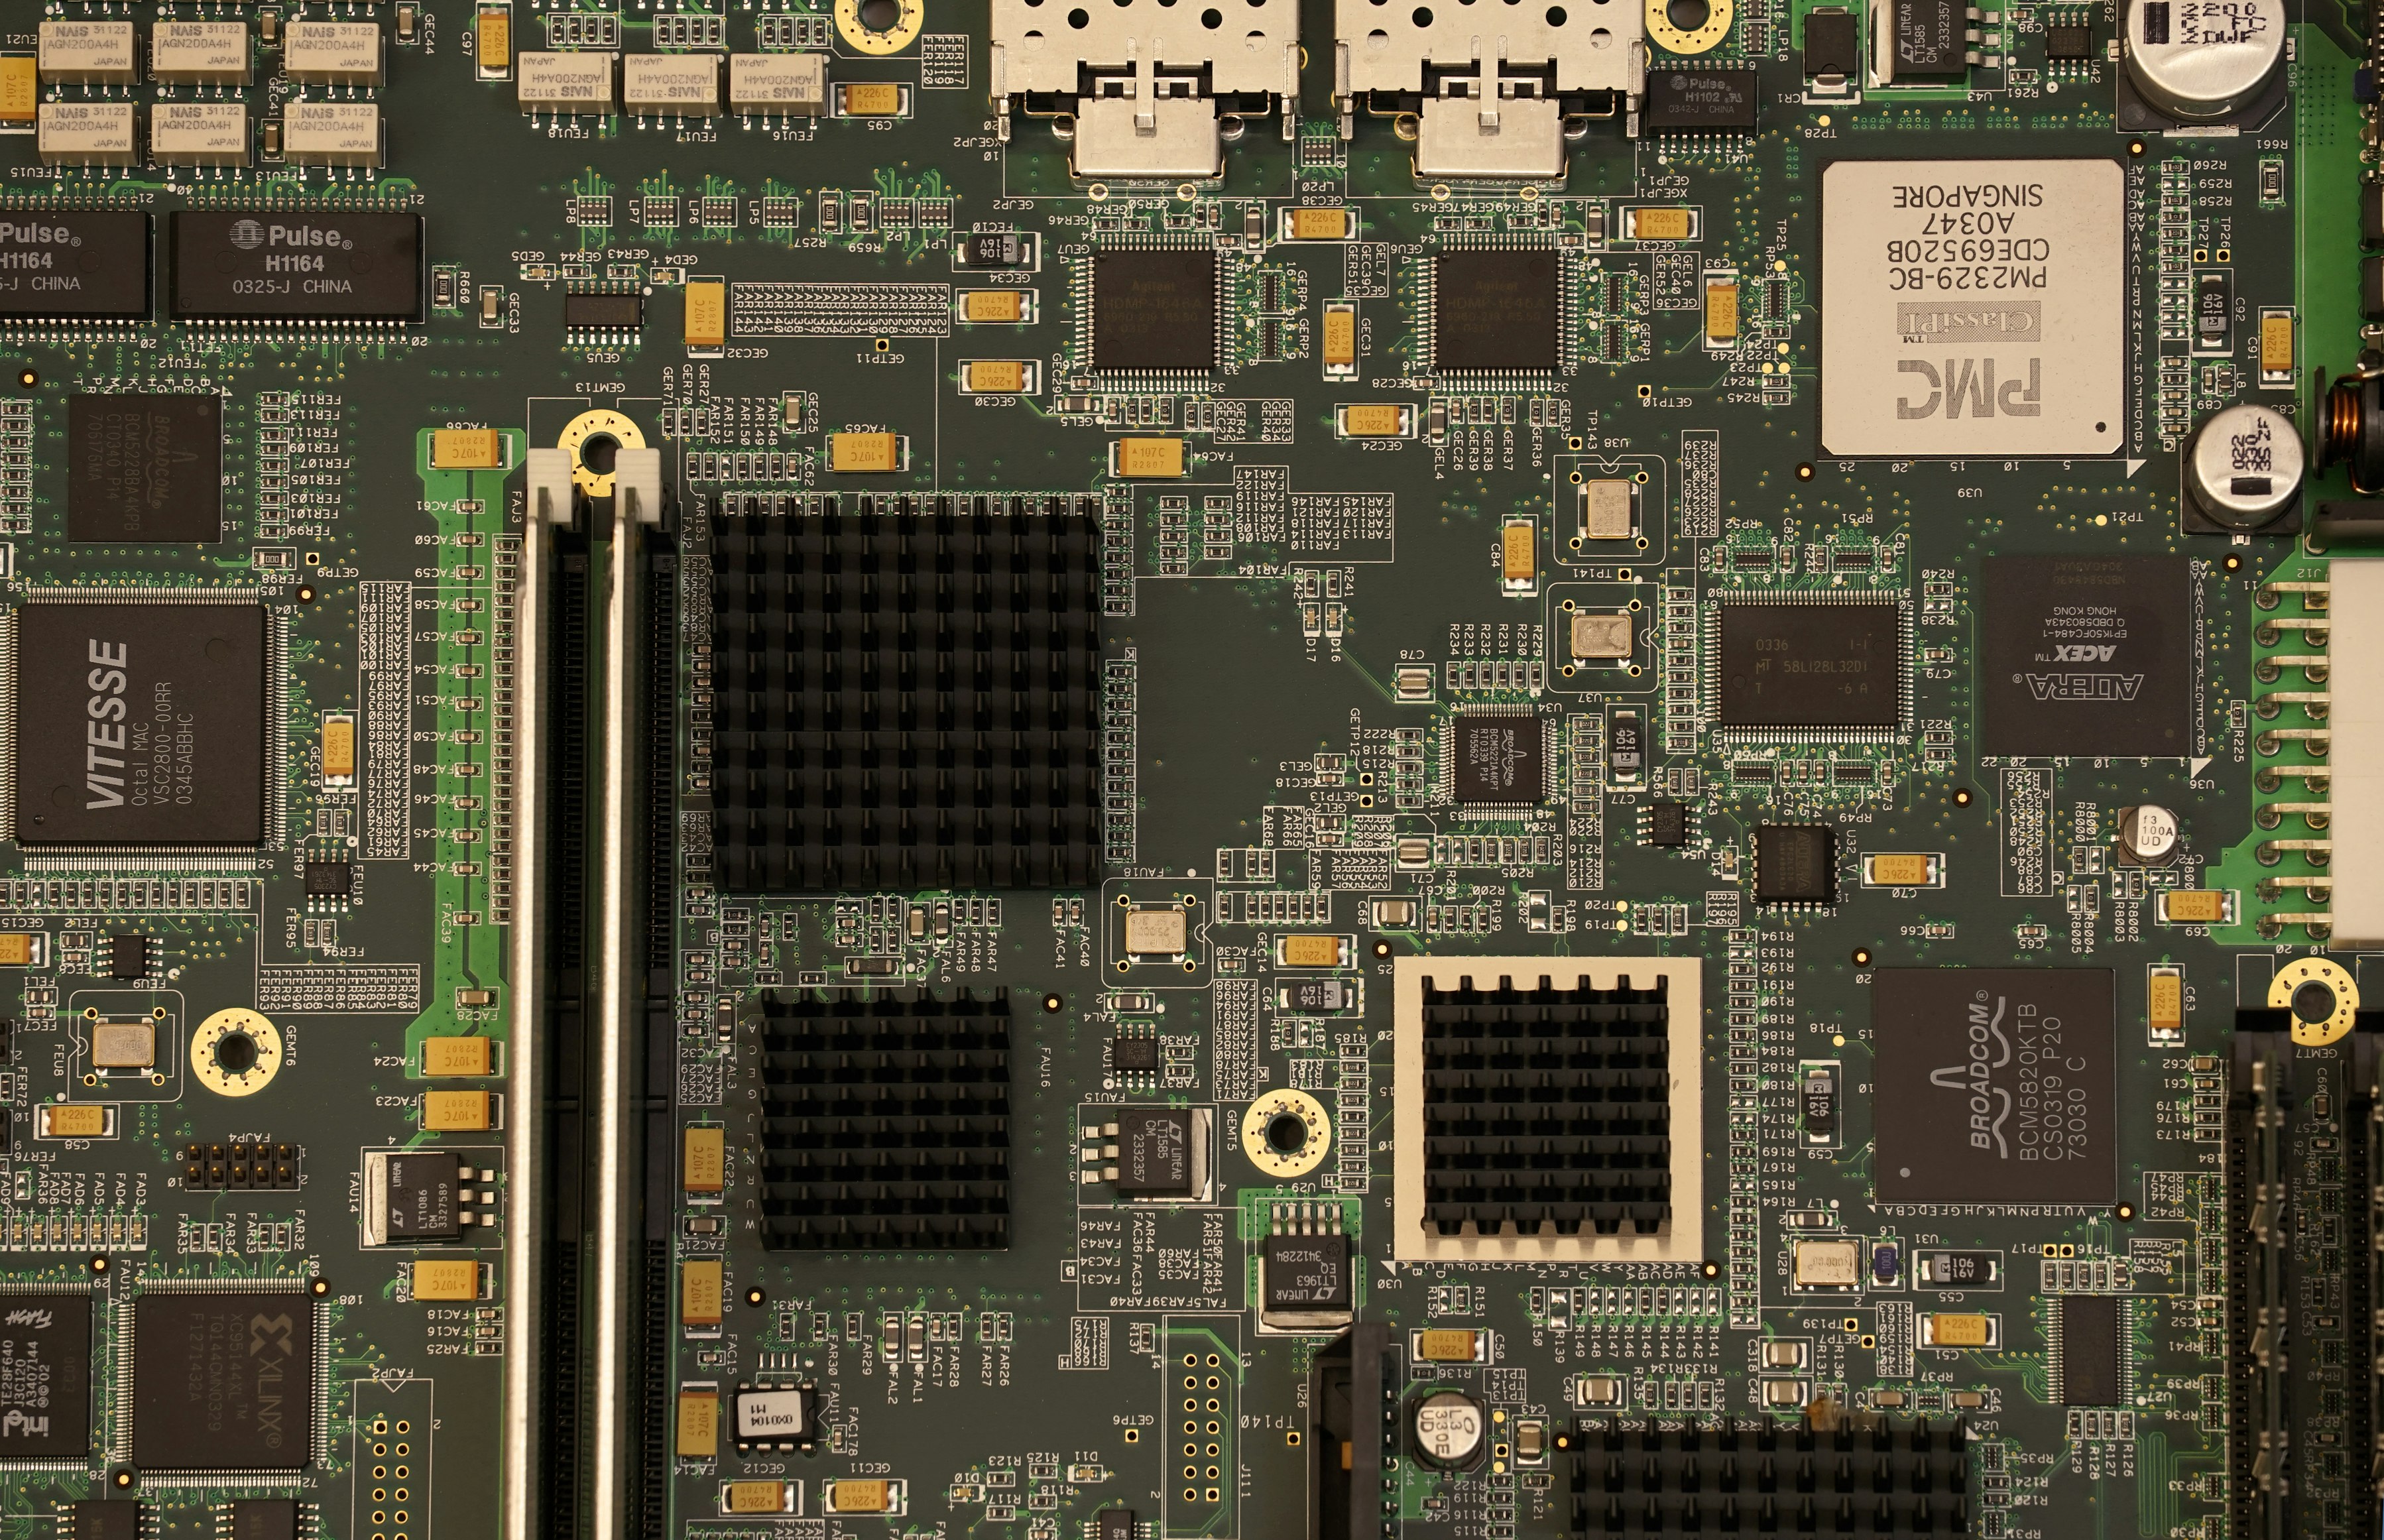 A circuit board close up with various chips and slots